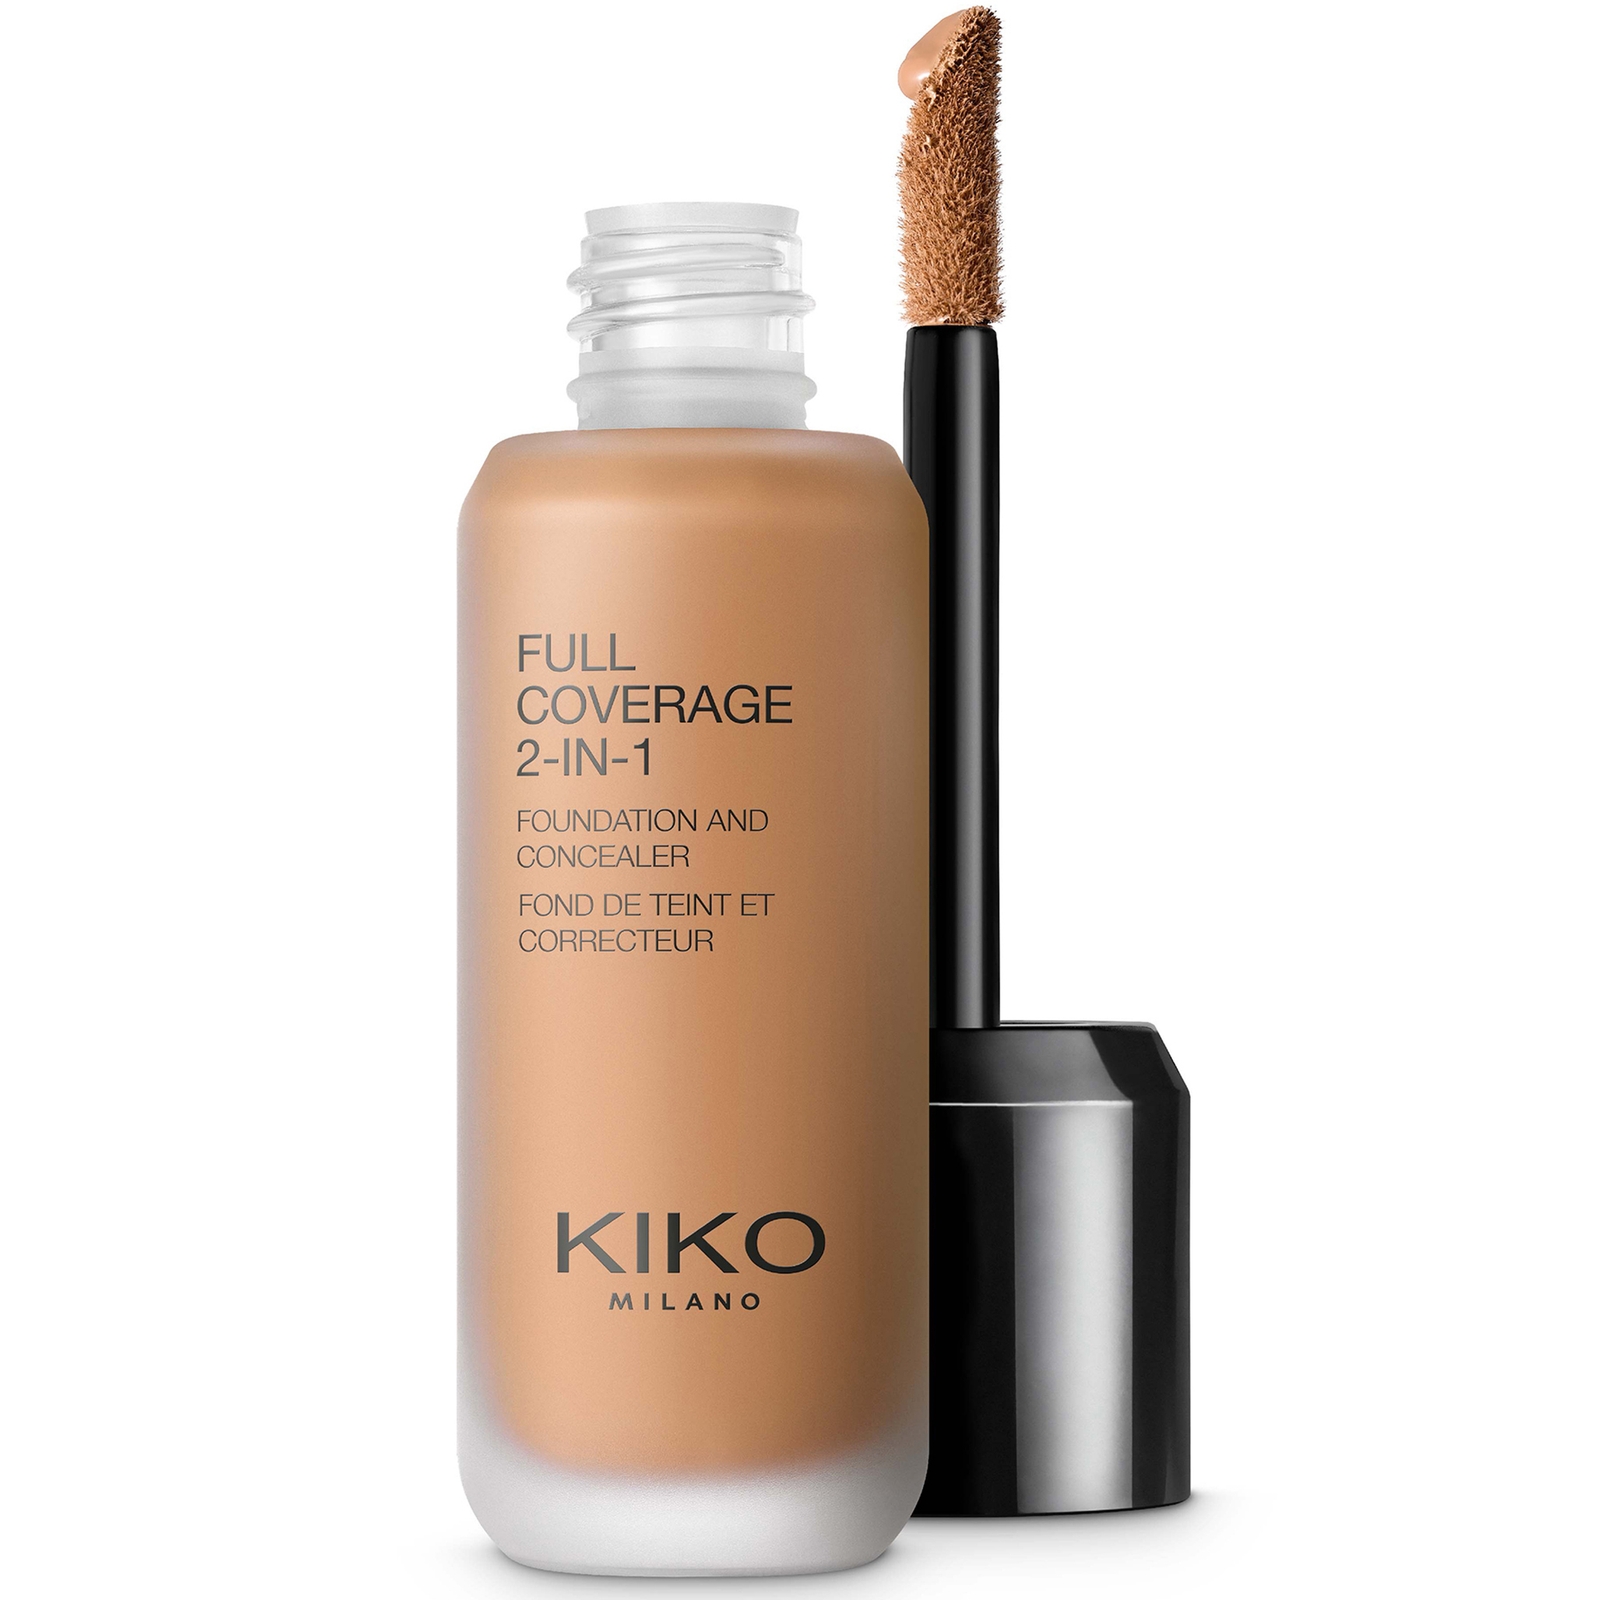 KIKO Milano Full Coverage 2-in-1 Foundation and Concealer 25ml (Various Shades) - 105 Warm Beige